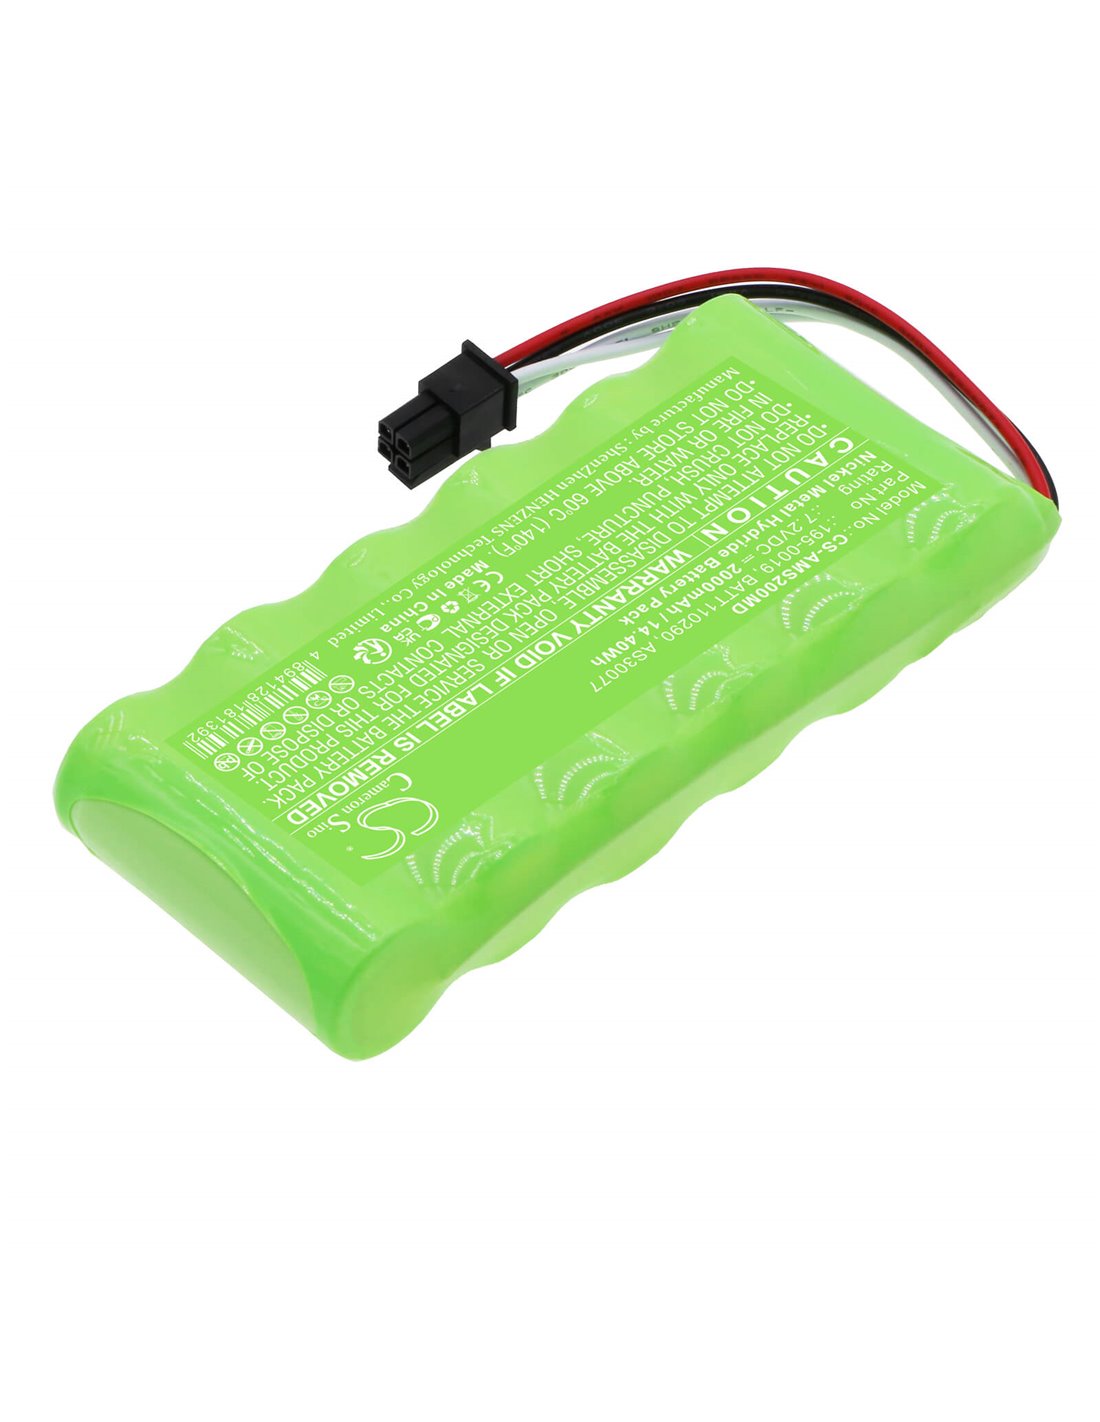 7.2V, Ni-MH, 2000mAh, Battery fits Aspect Medical System A2000 Bis Monitoring, Bis View Monitoring, 14.40Wh